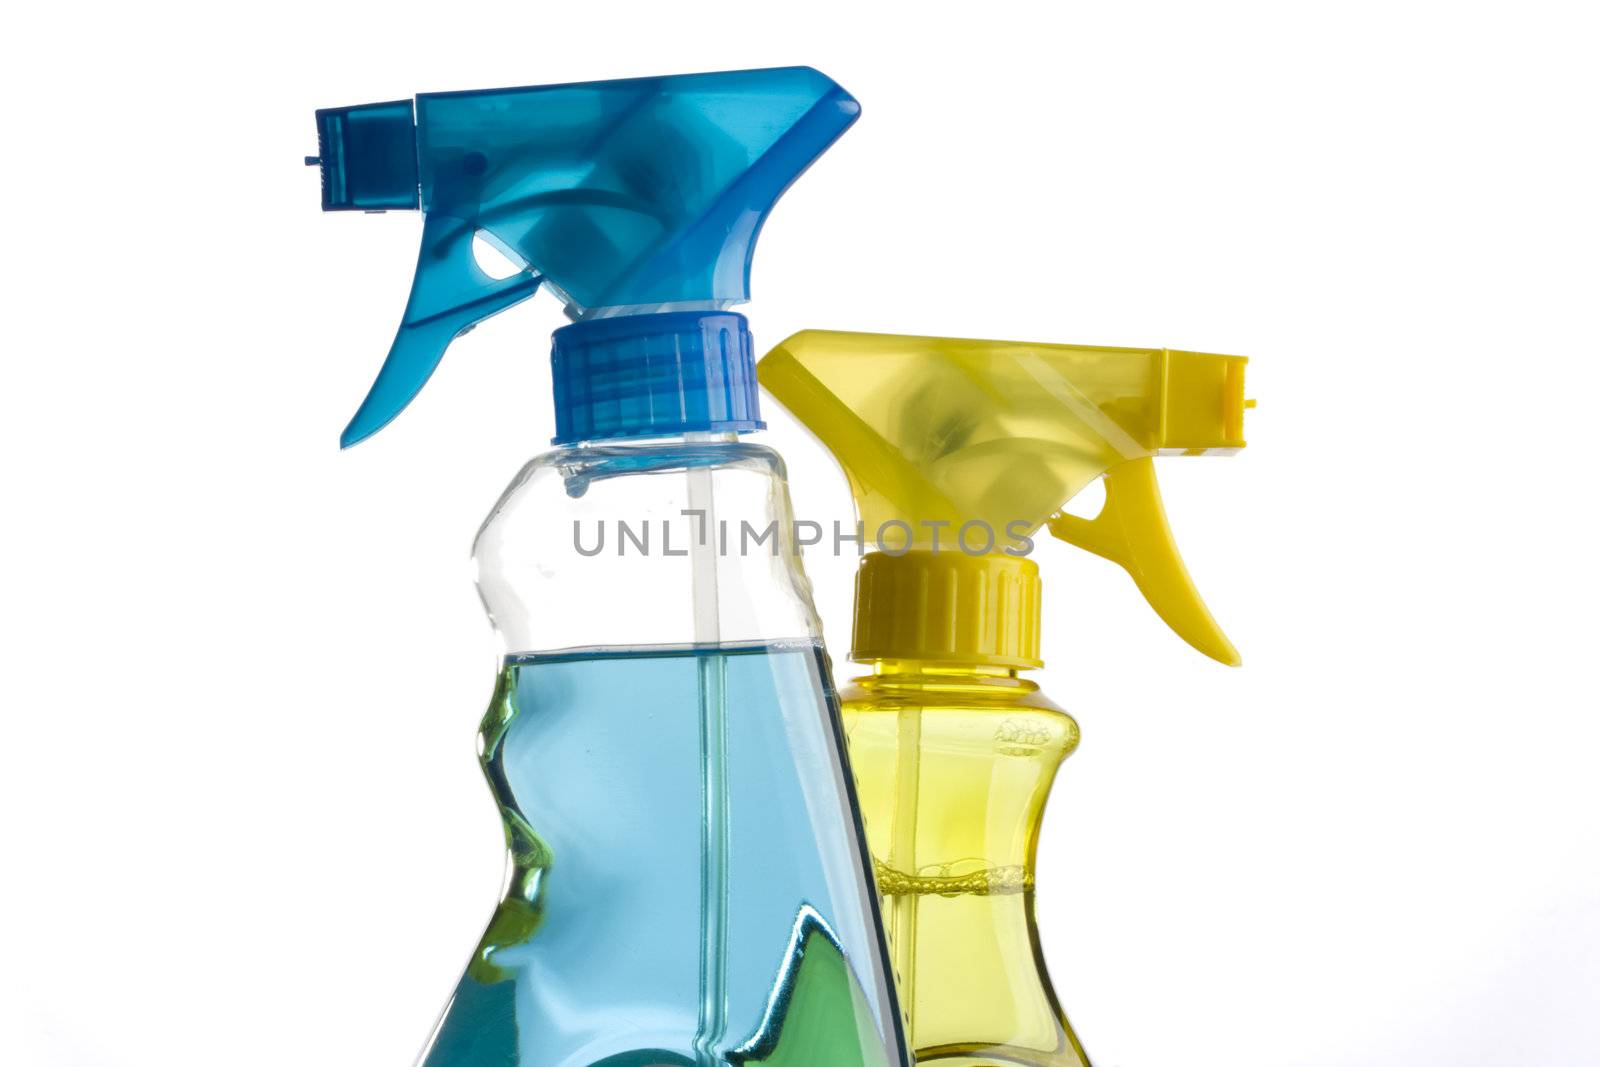 blue and yellow trigger spray bottles